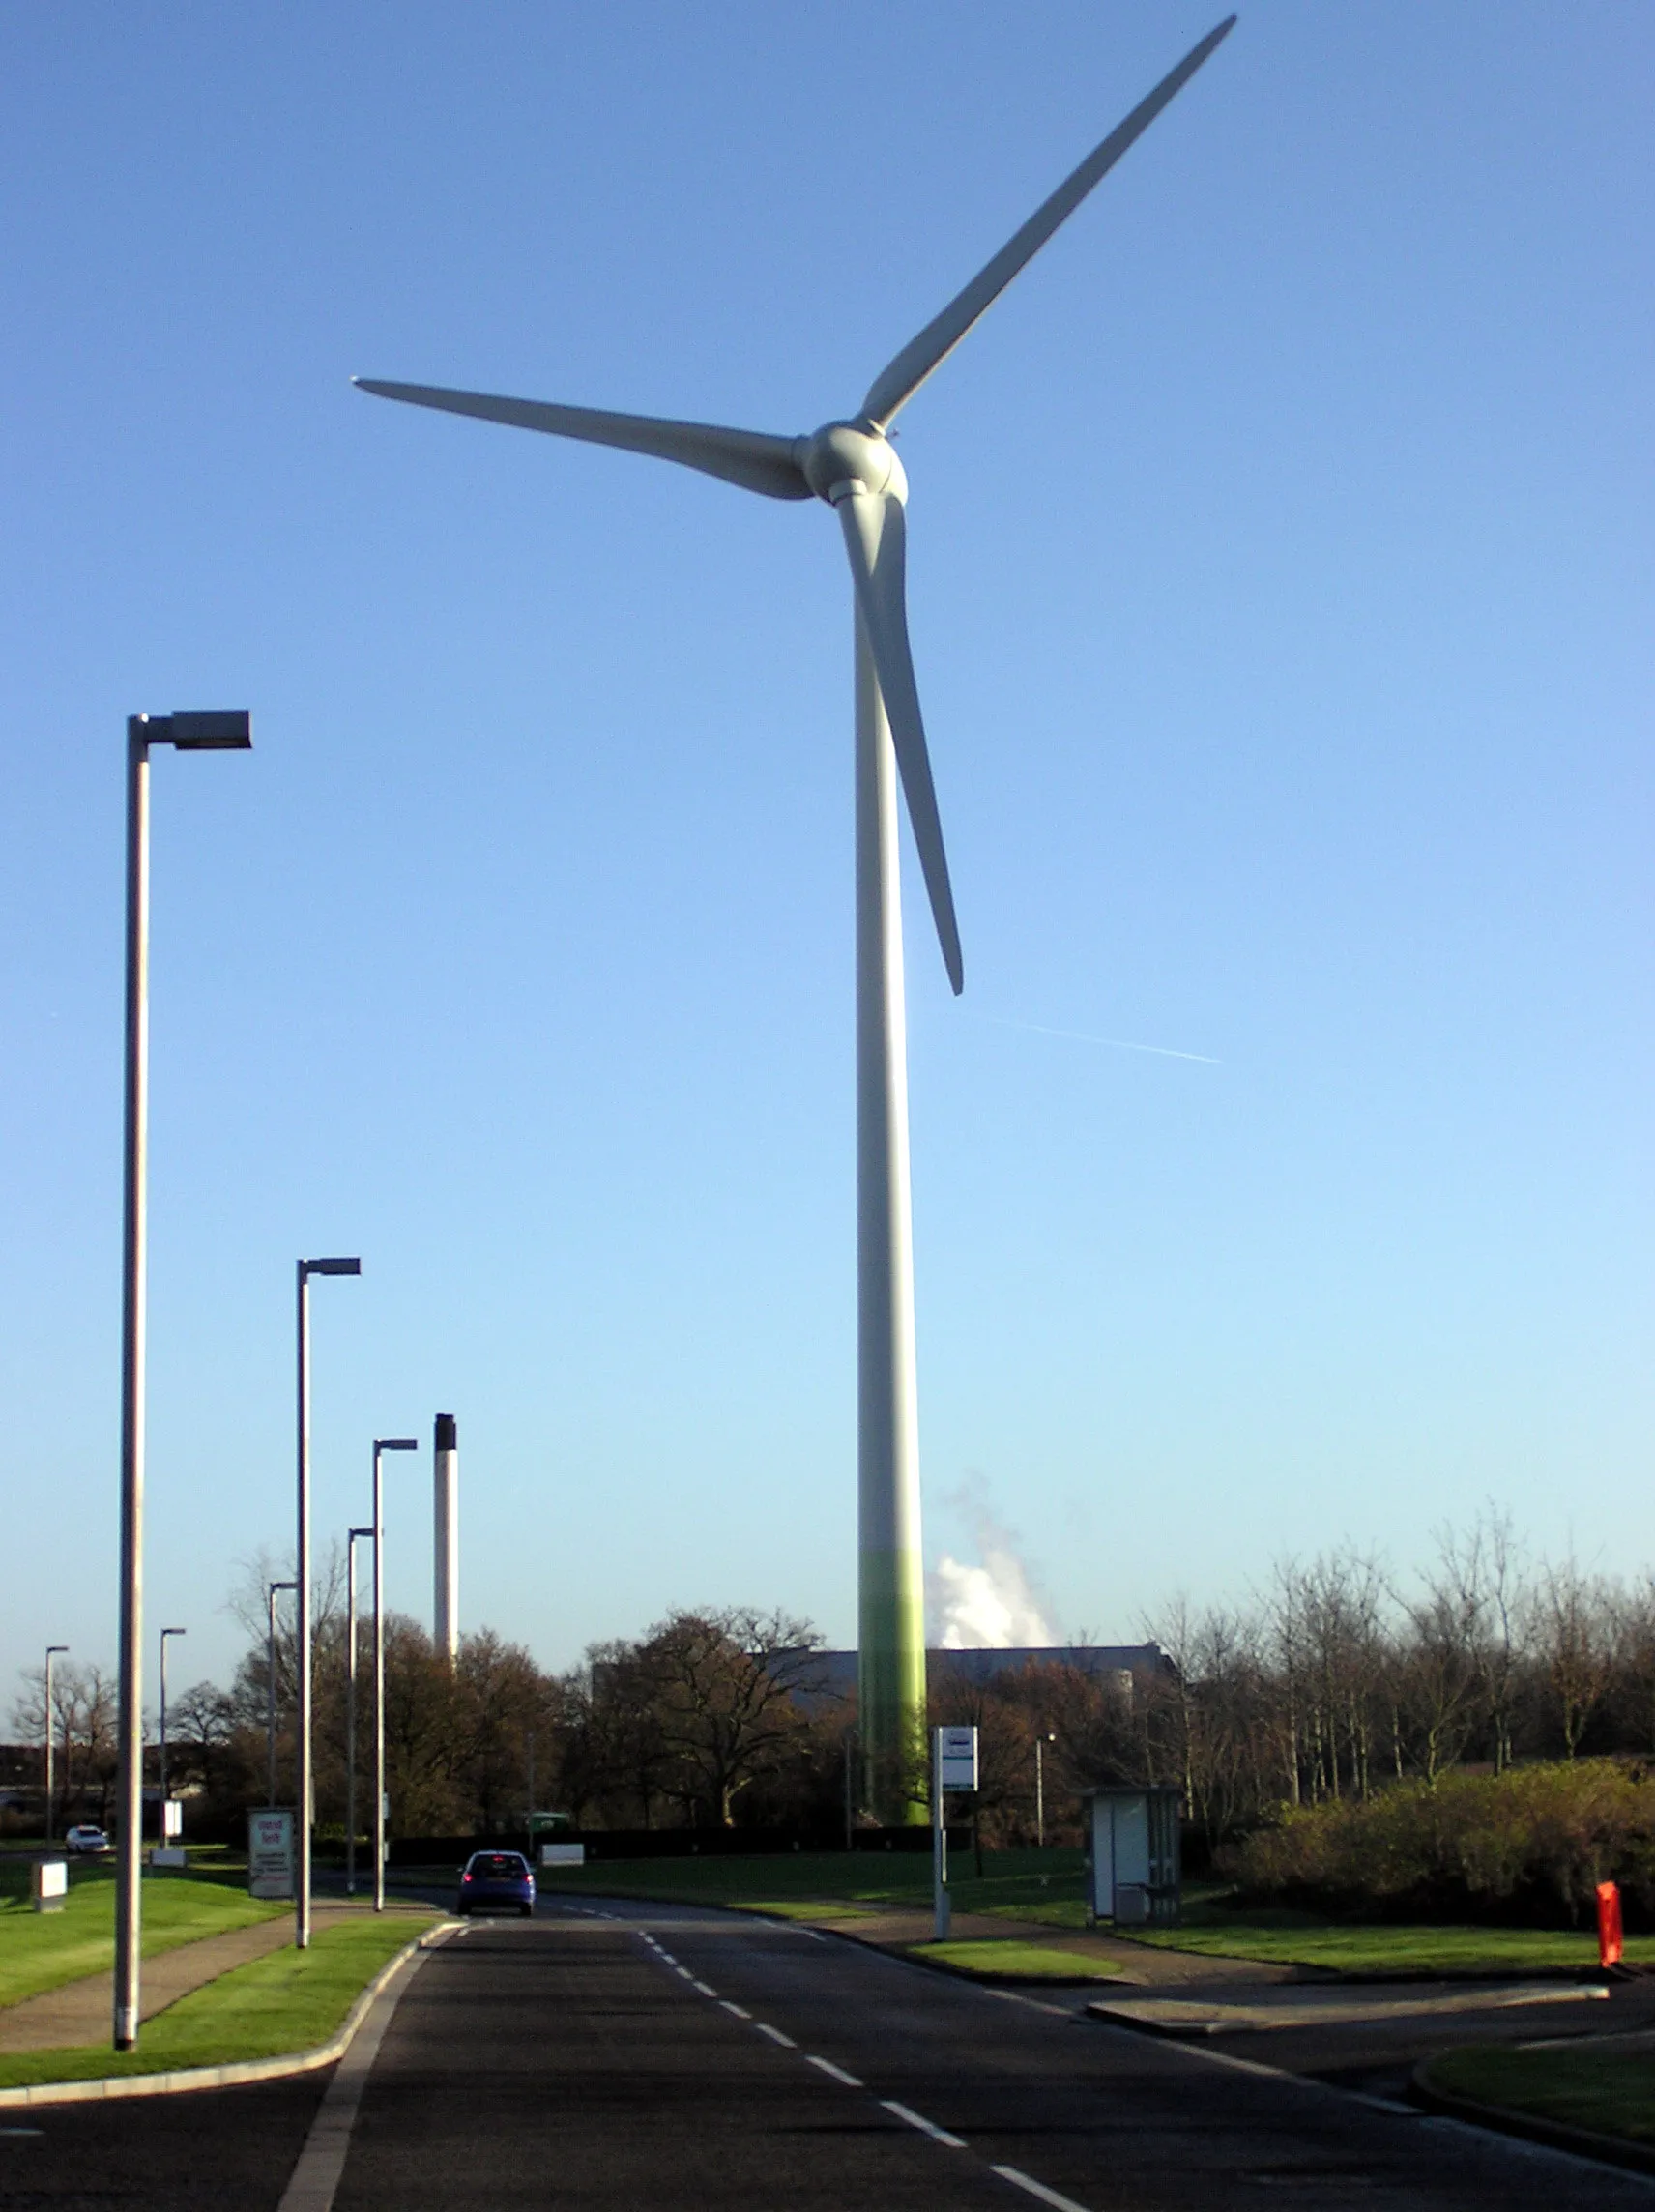 Photo showing: A wind generator at Junction 11 of the M4 motorway, at Greenpark industrial estate, near Reading, Berkshire, England. Construction finished in November 2005. The turbine supplies approx 1000 homes (up to 1,500 local homes and businesses).
The turbine on top of the 85 m (279 ft) tower is the German-made Enercon E-70. The three fibreglass blades are each 33 m (108 ft) long, rotating at 6 to 21 rpm depending on wind speed. Maximum power output of 2.05 MW is reached at a wind speed of 14 m/s (31 mph) then remains constant with increasing wind speed. The hub is kept facing into wind.

At a pre-determined high wind speed the blades cease rotation.